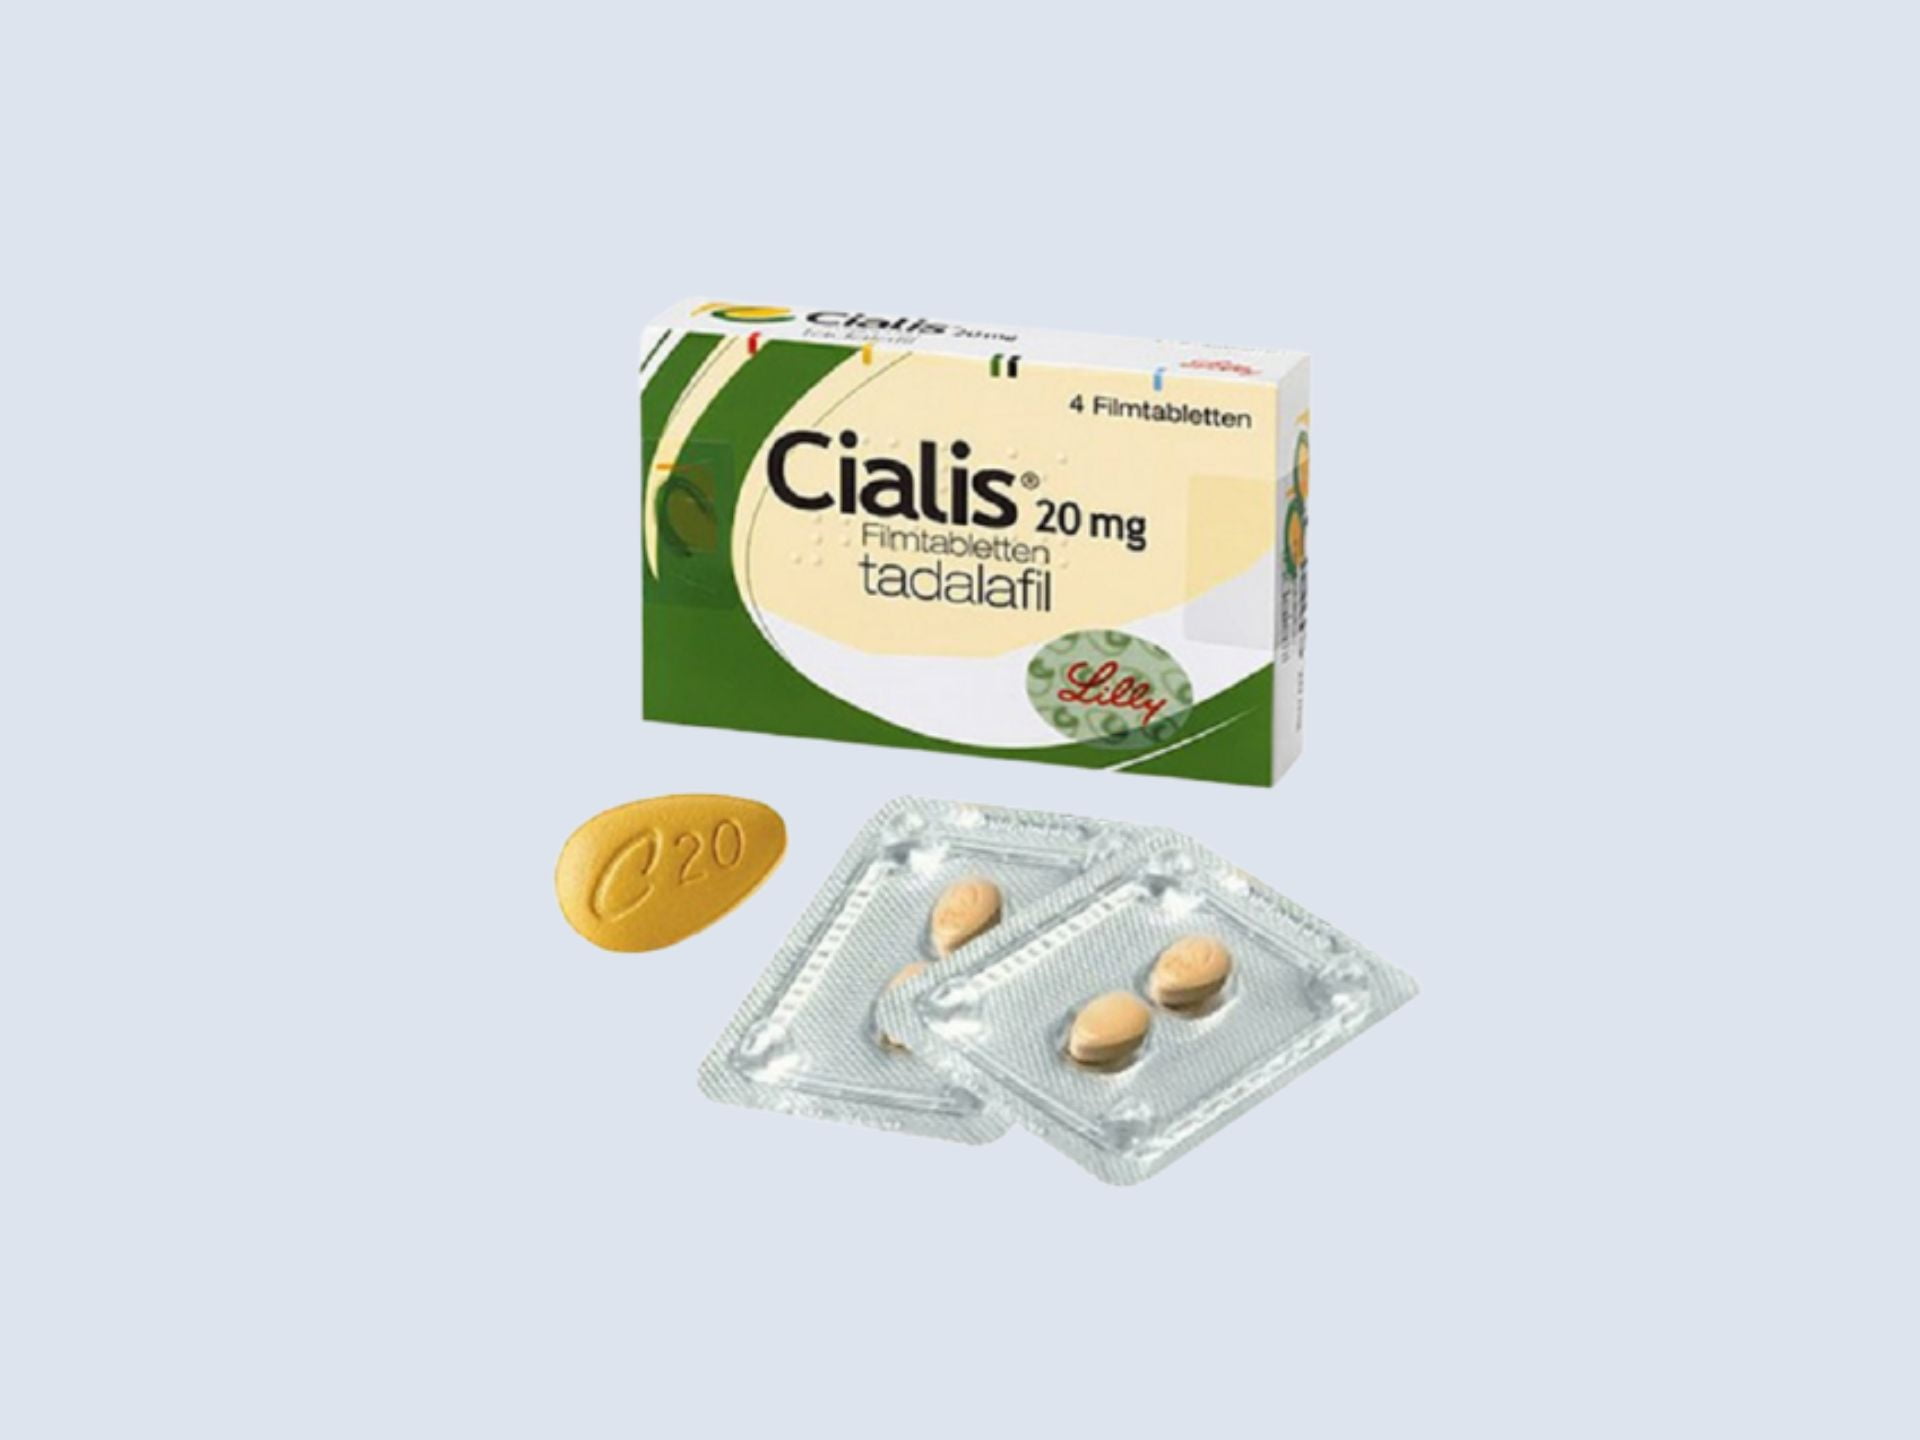 ilovechems cialis tadalafil 20mg for sale 1-ilovechems